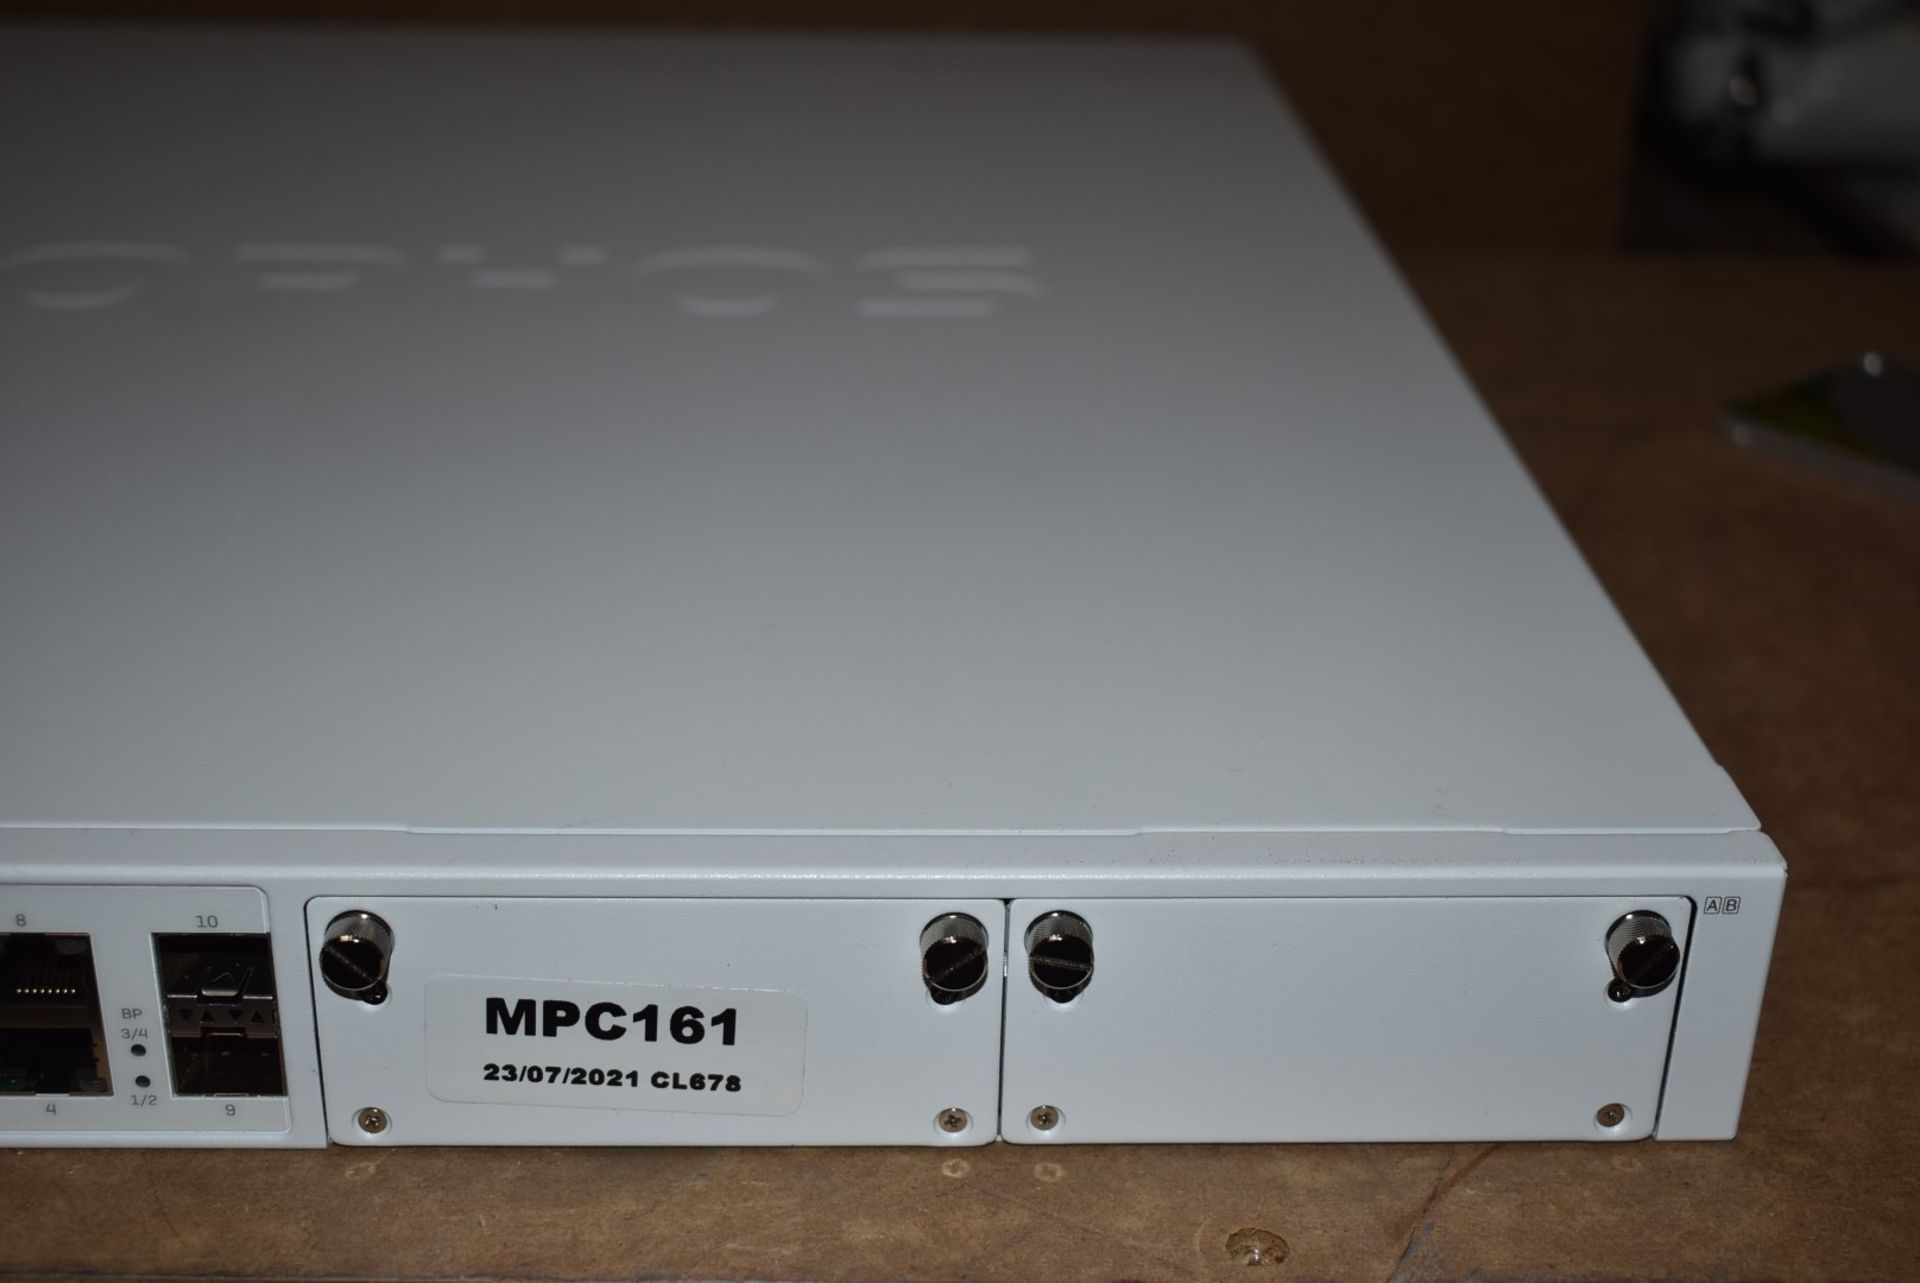 1 x Sophos XG430 Edge Firewall Appliance - Rev2 - Manufactured Jan 2019 - Includes Power Cable - - Image 7 of 11